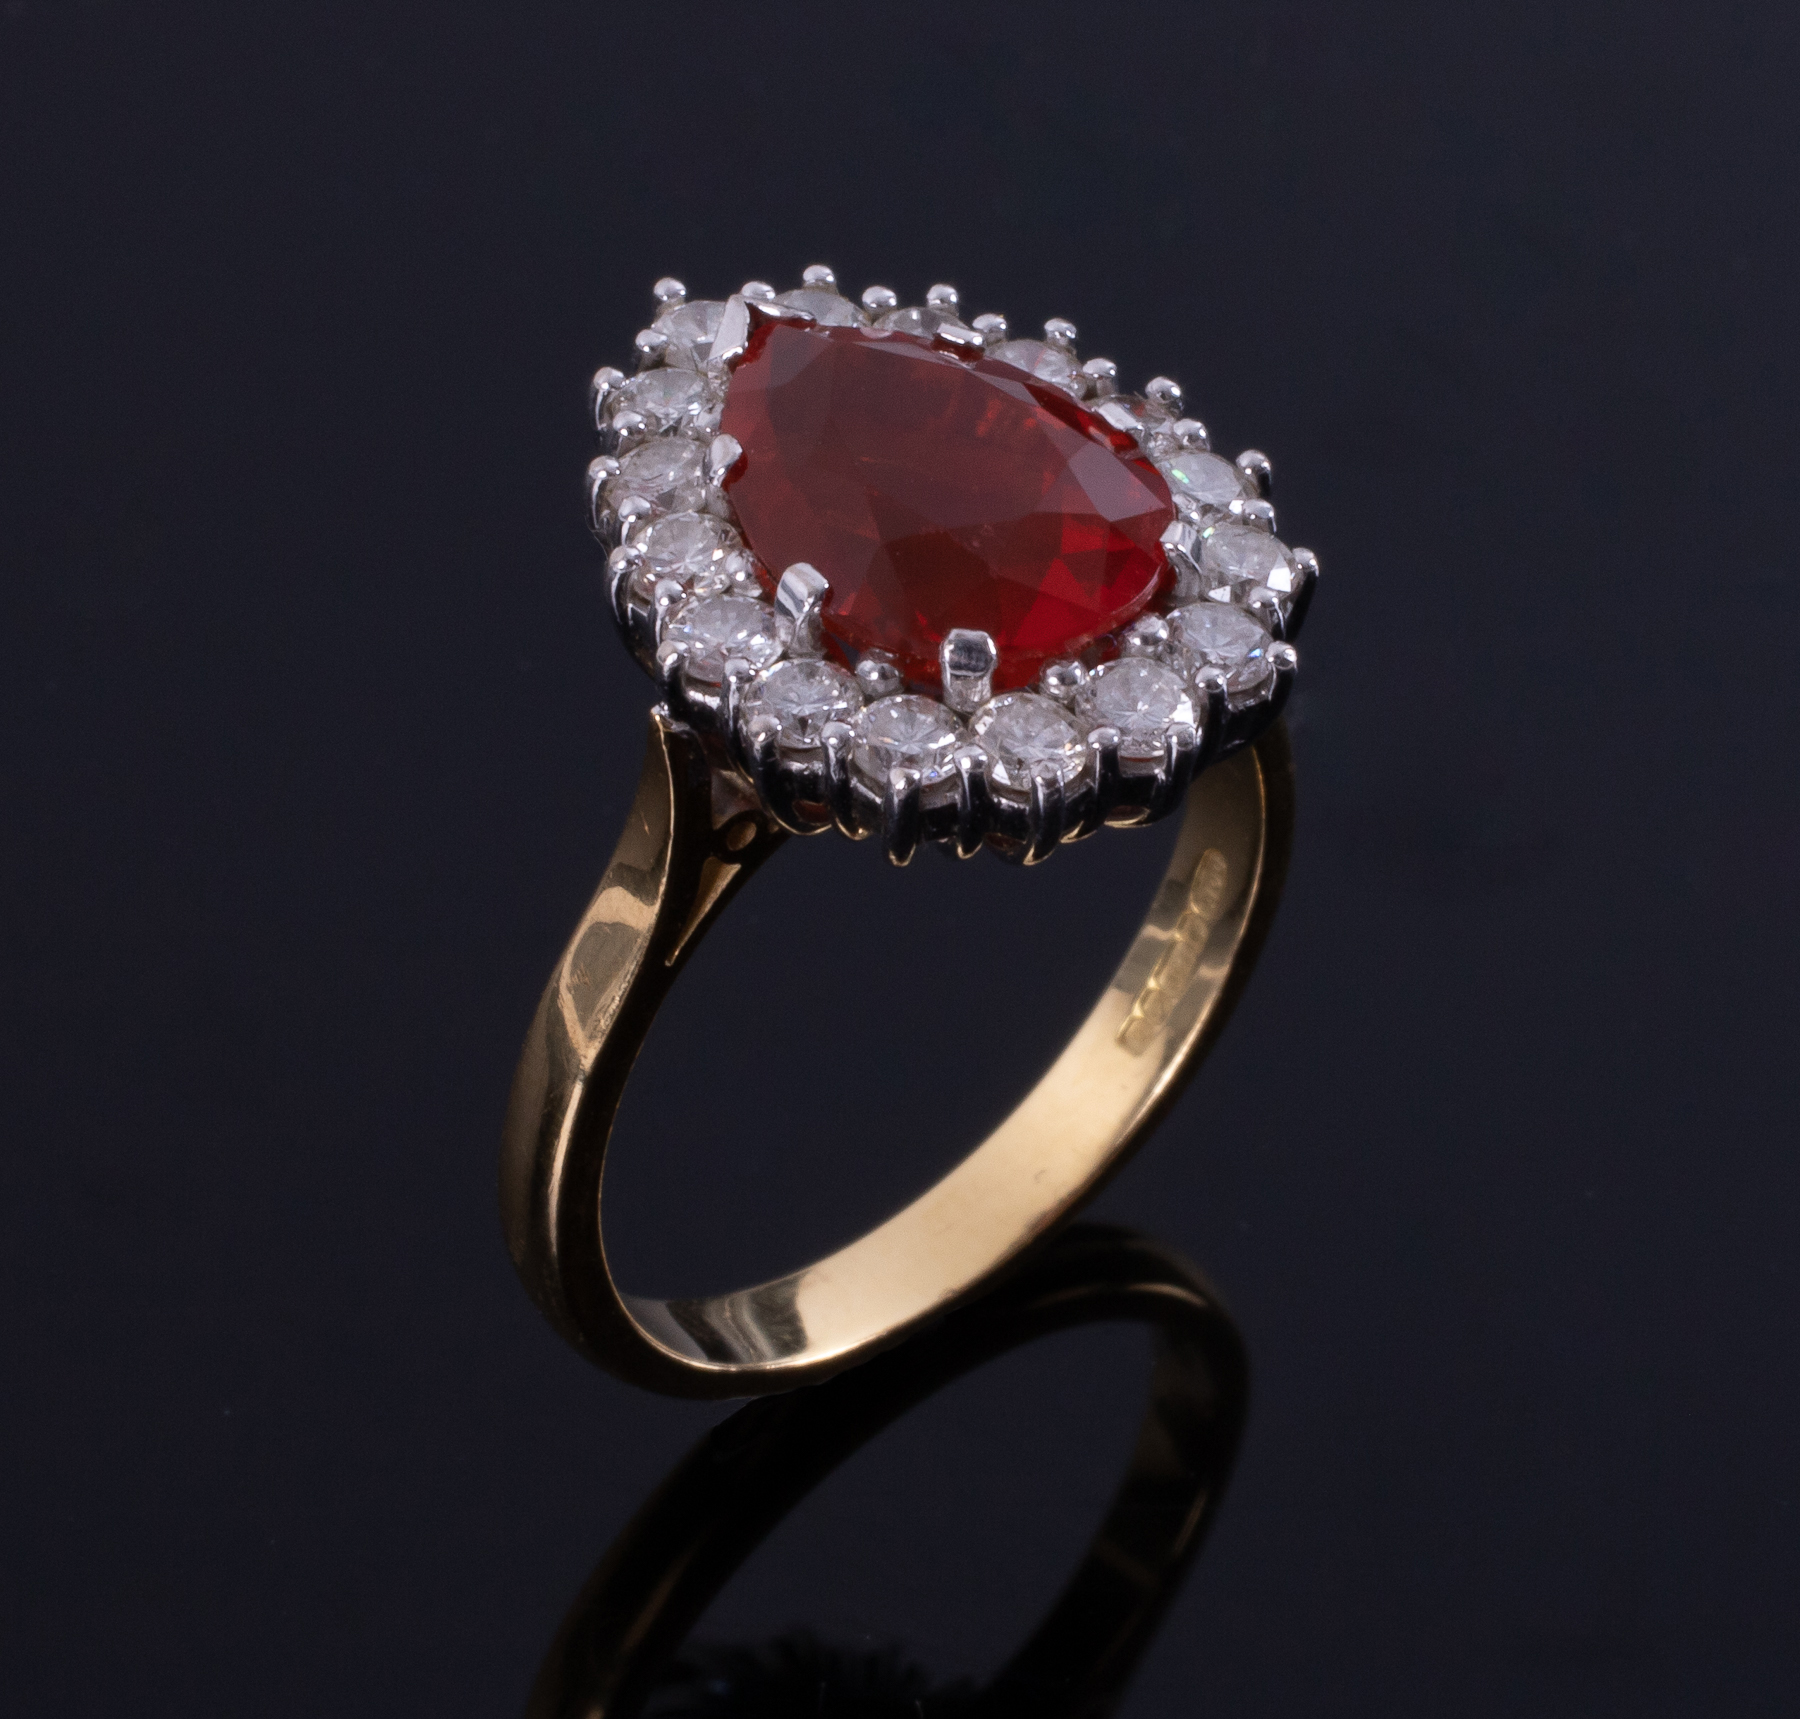 An 18ct yellow & white gold pear shaped cluster ring set with a central pear shaped fire opal - Image 2 of 2